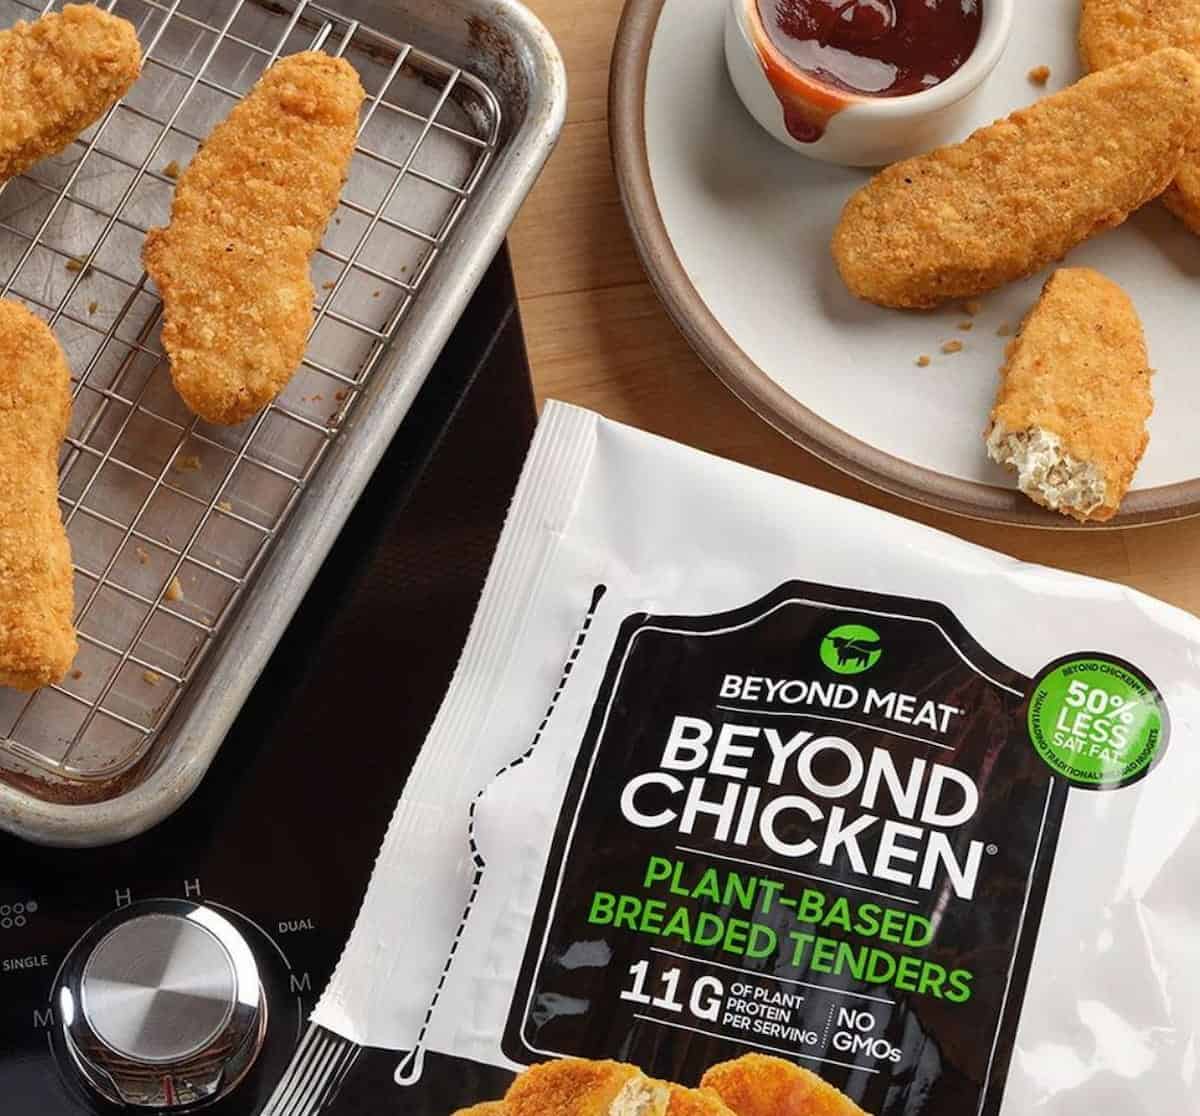 A package of Beyond Meat's Beyond Chicken, with its plant-based nuggets in the background.